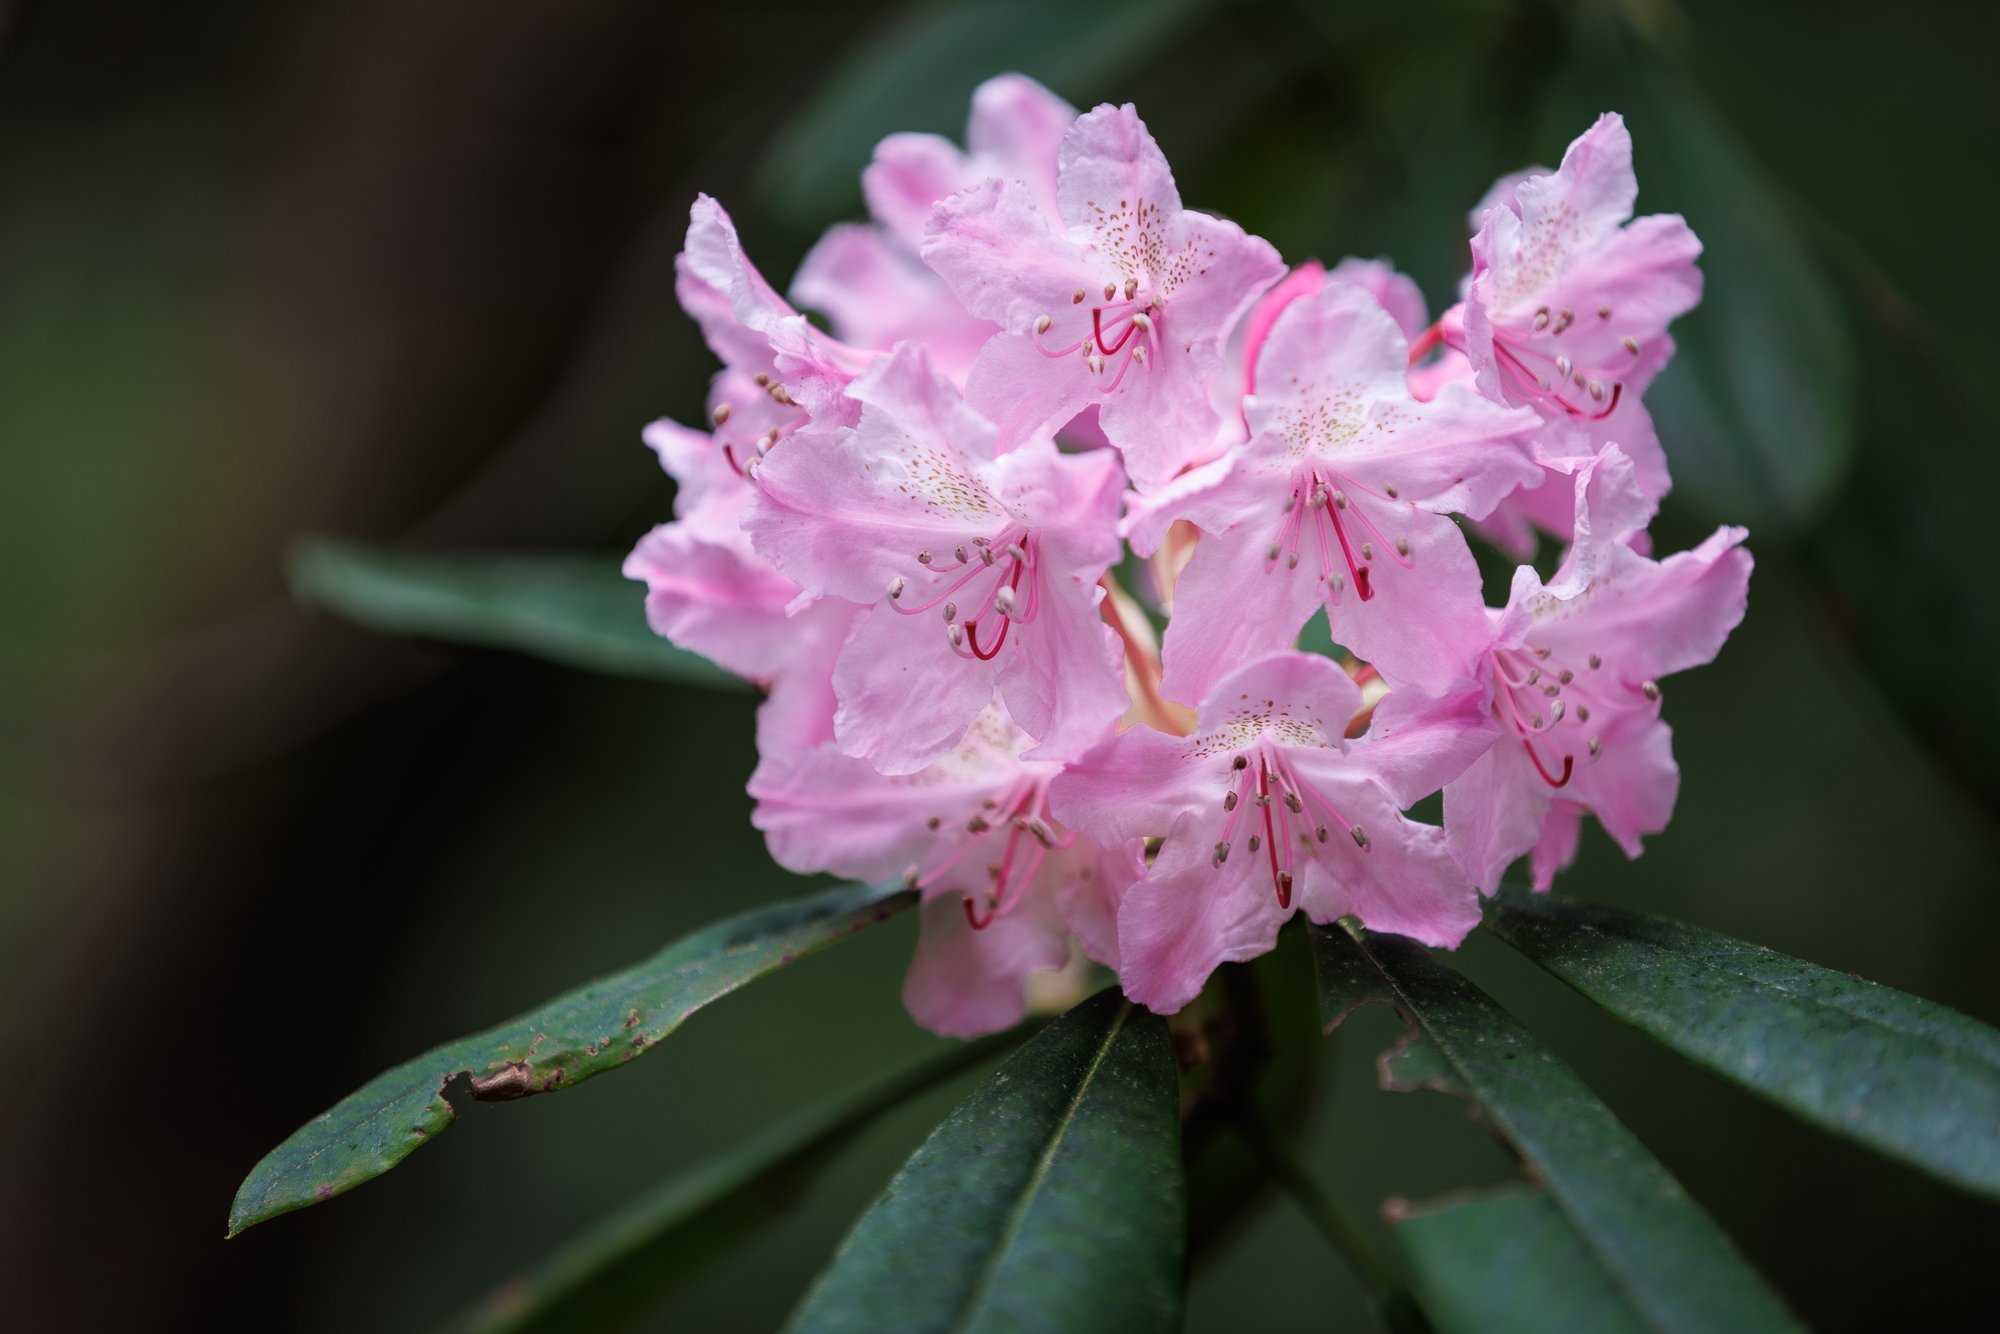 rhododendron-redwoods-©NadeenFlynnPhotography-8426.jpg